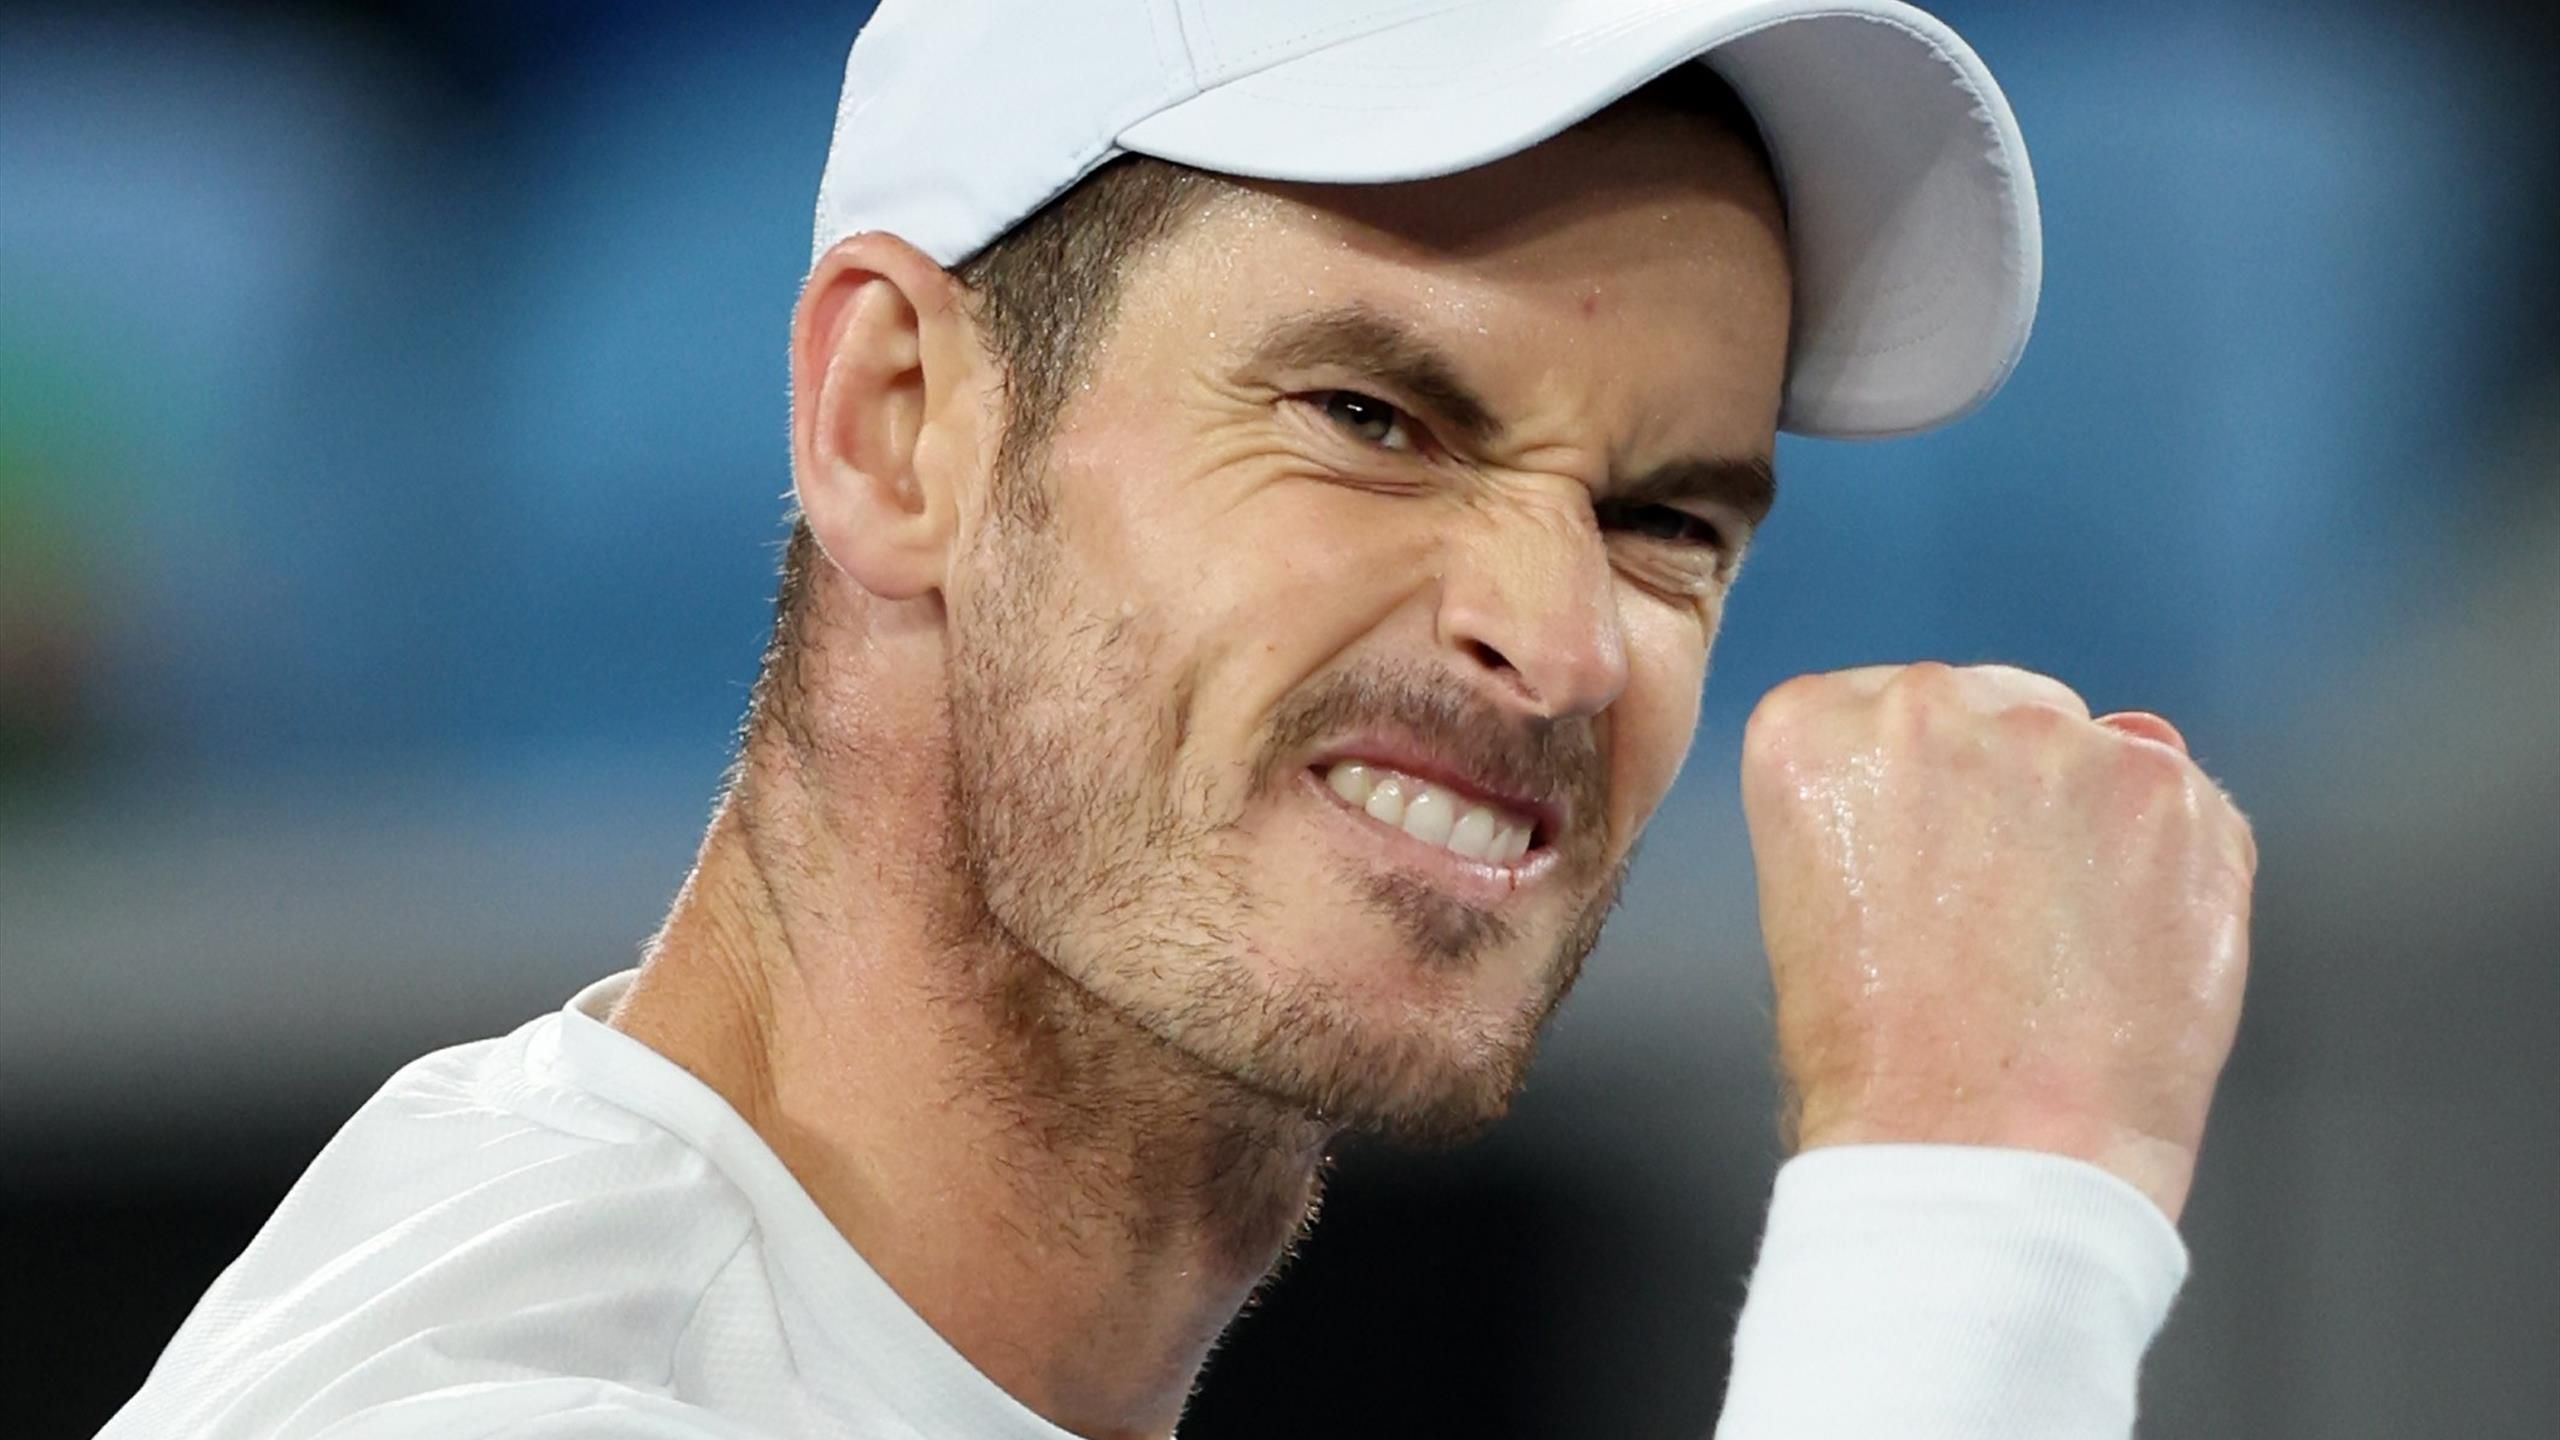 Australian Open 2023 How to watch Andy Murrays match with Roberto Bautista Agut, live stream details